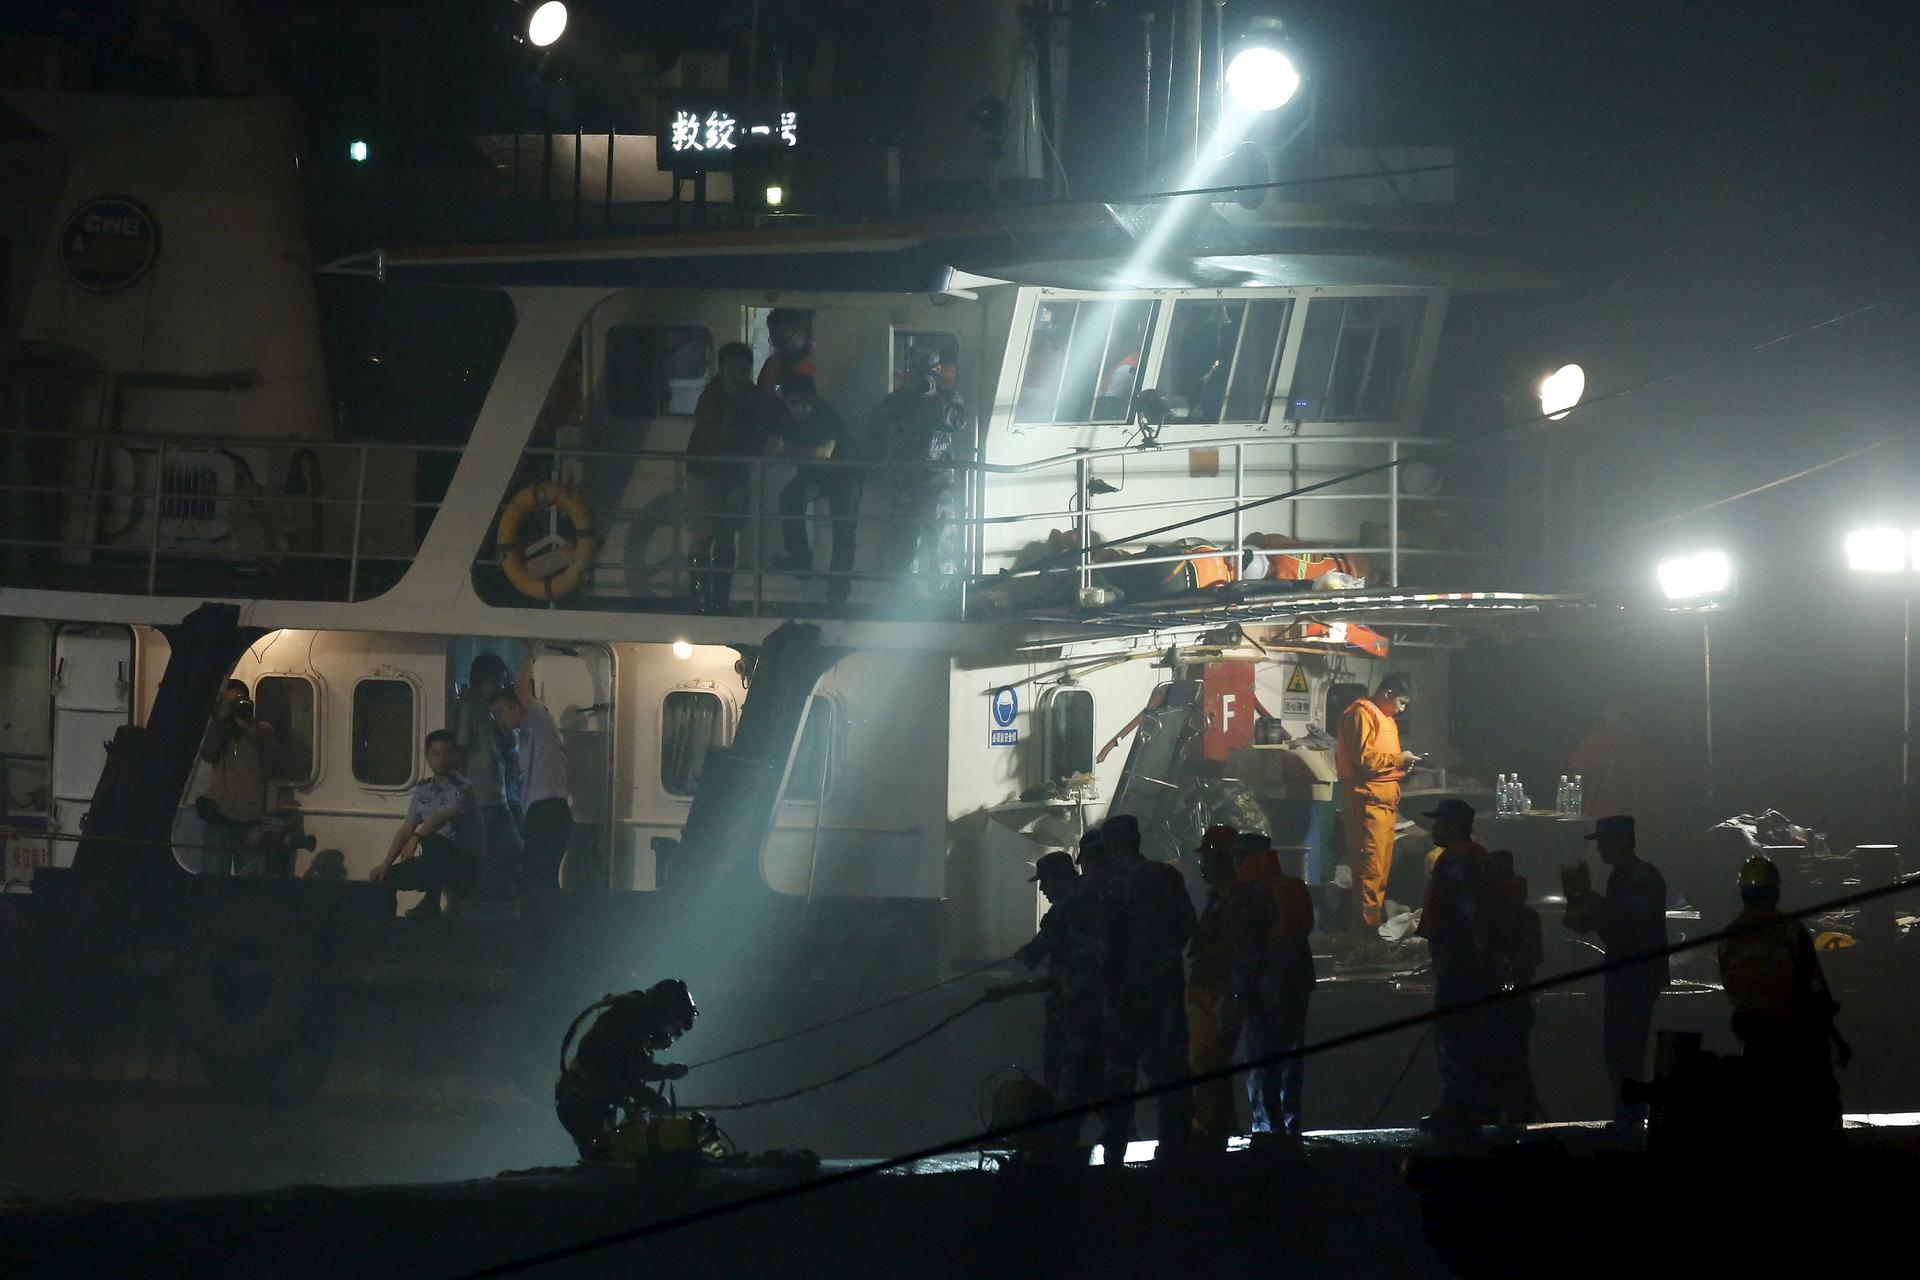 Rescue workers atop the Eastern Star search for more bodies in the capsized cruise ship in the Jianli section of the Yangtze River on Wednesday. Photo: Reuters